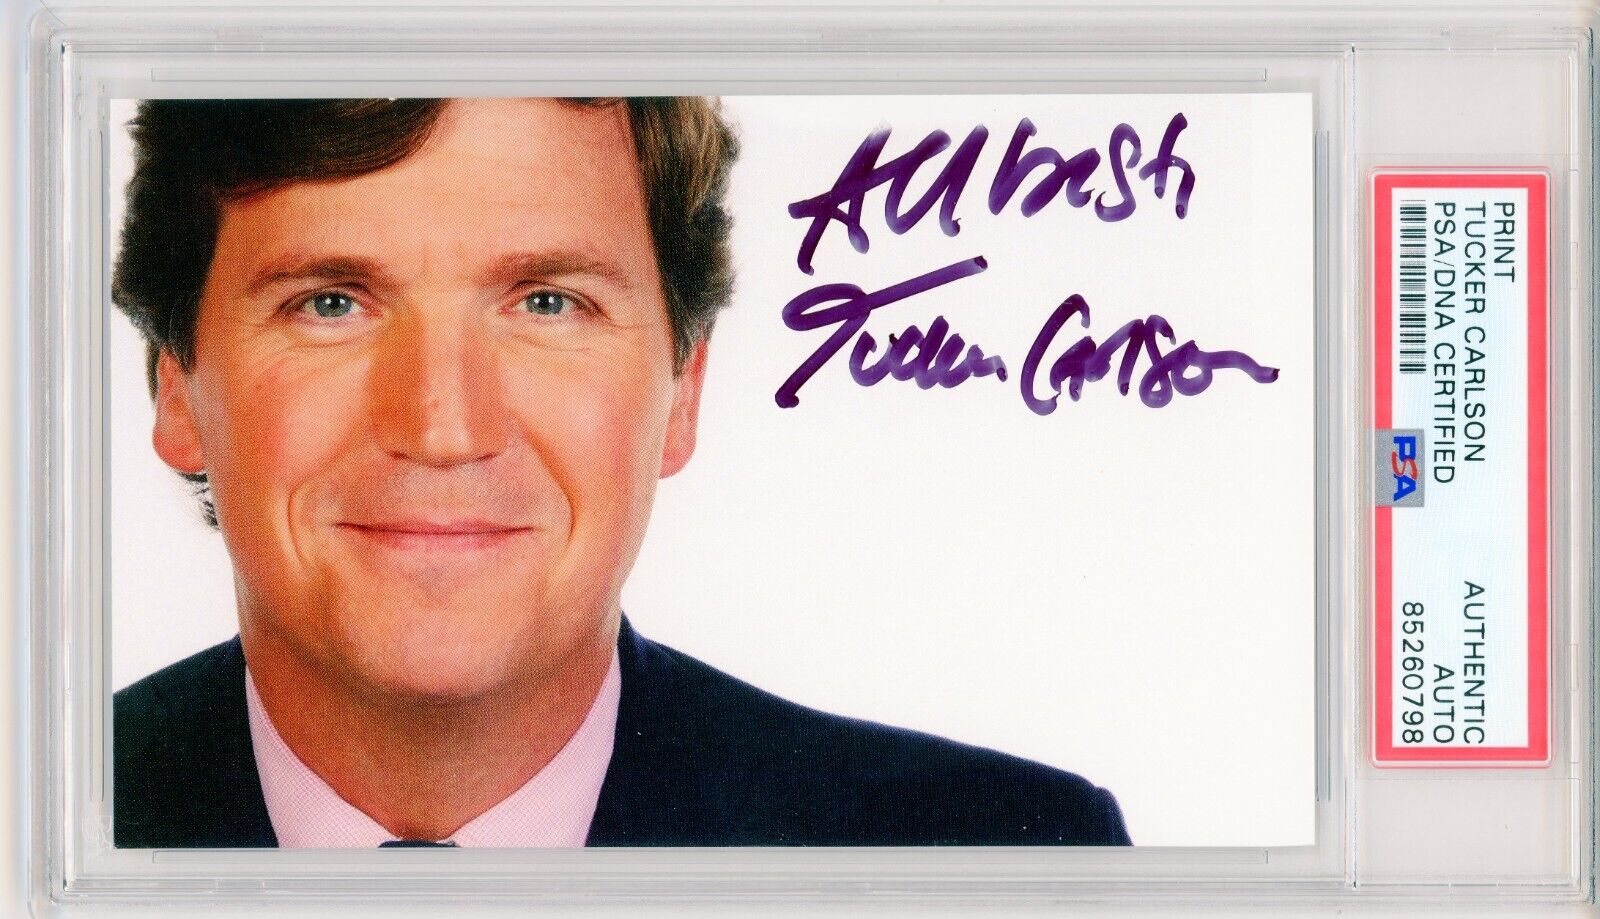 Tucker Carlson ~ Signed Autographed Authentic Signature Photo ~ PSA DNA Encased